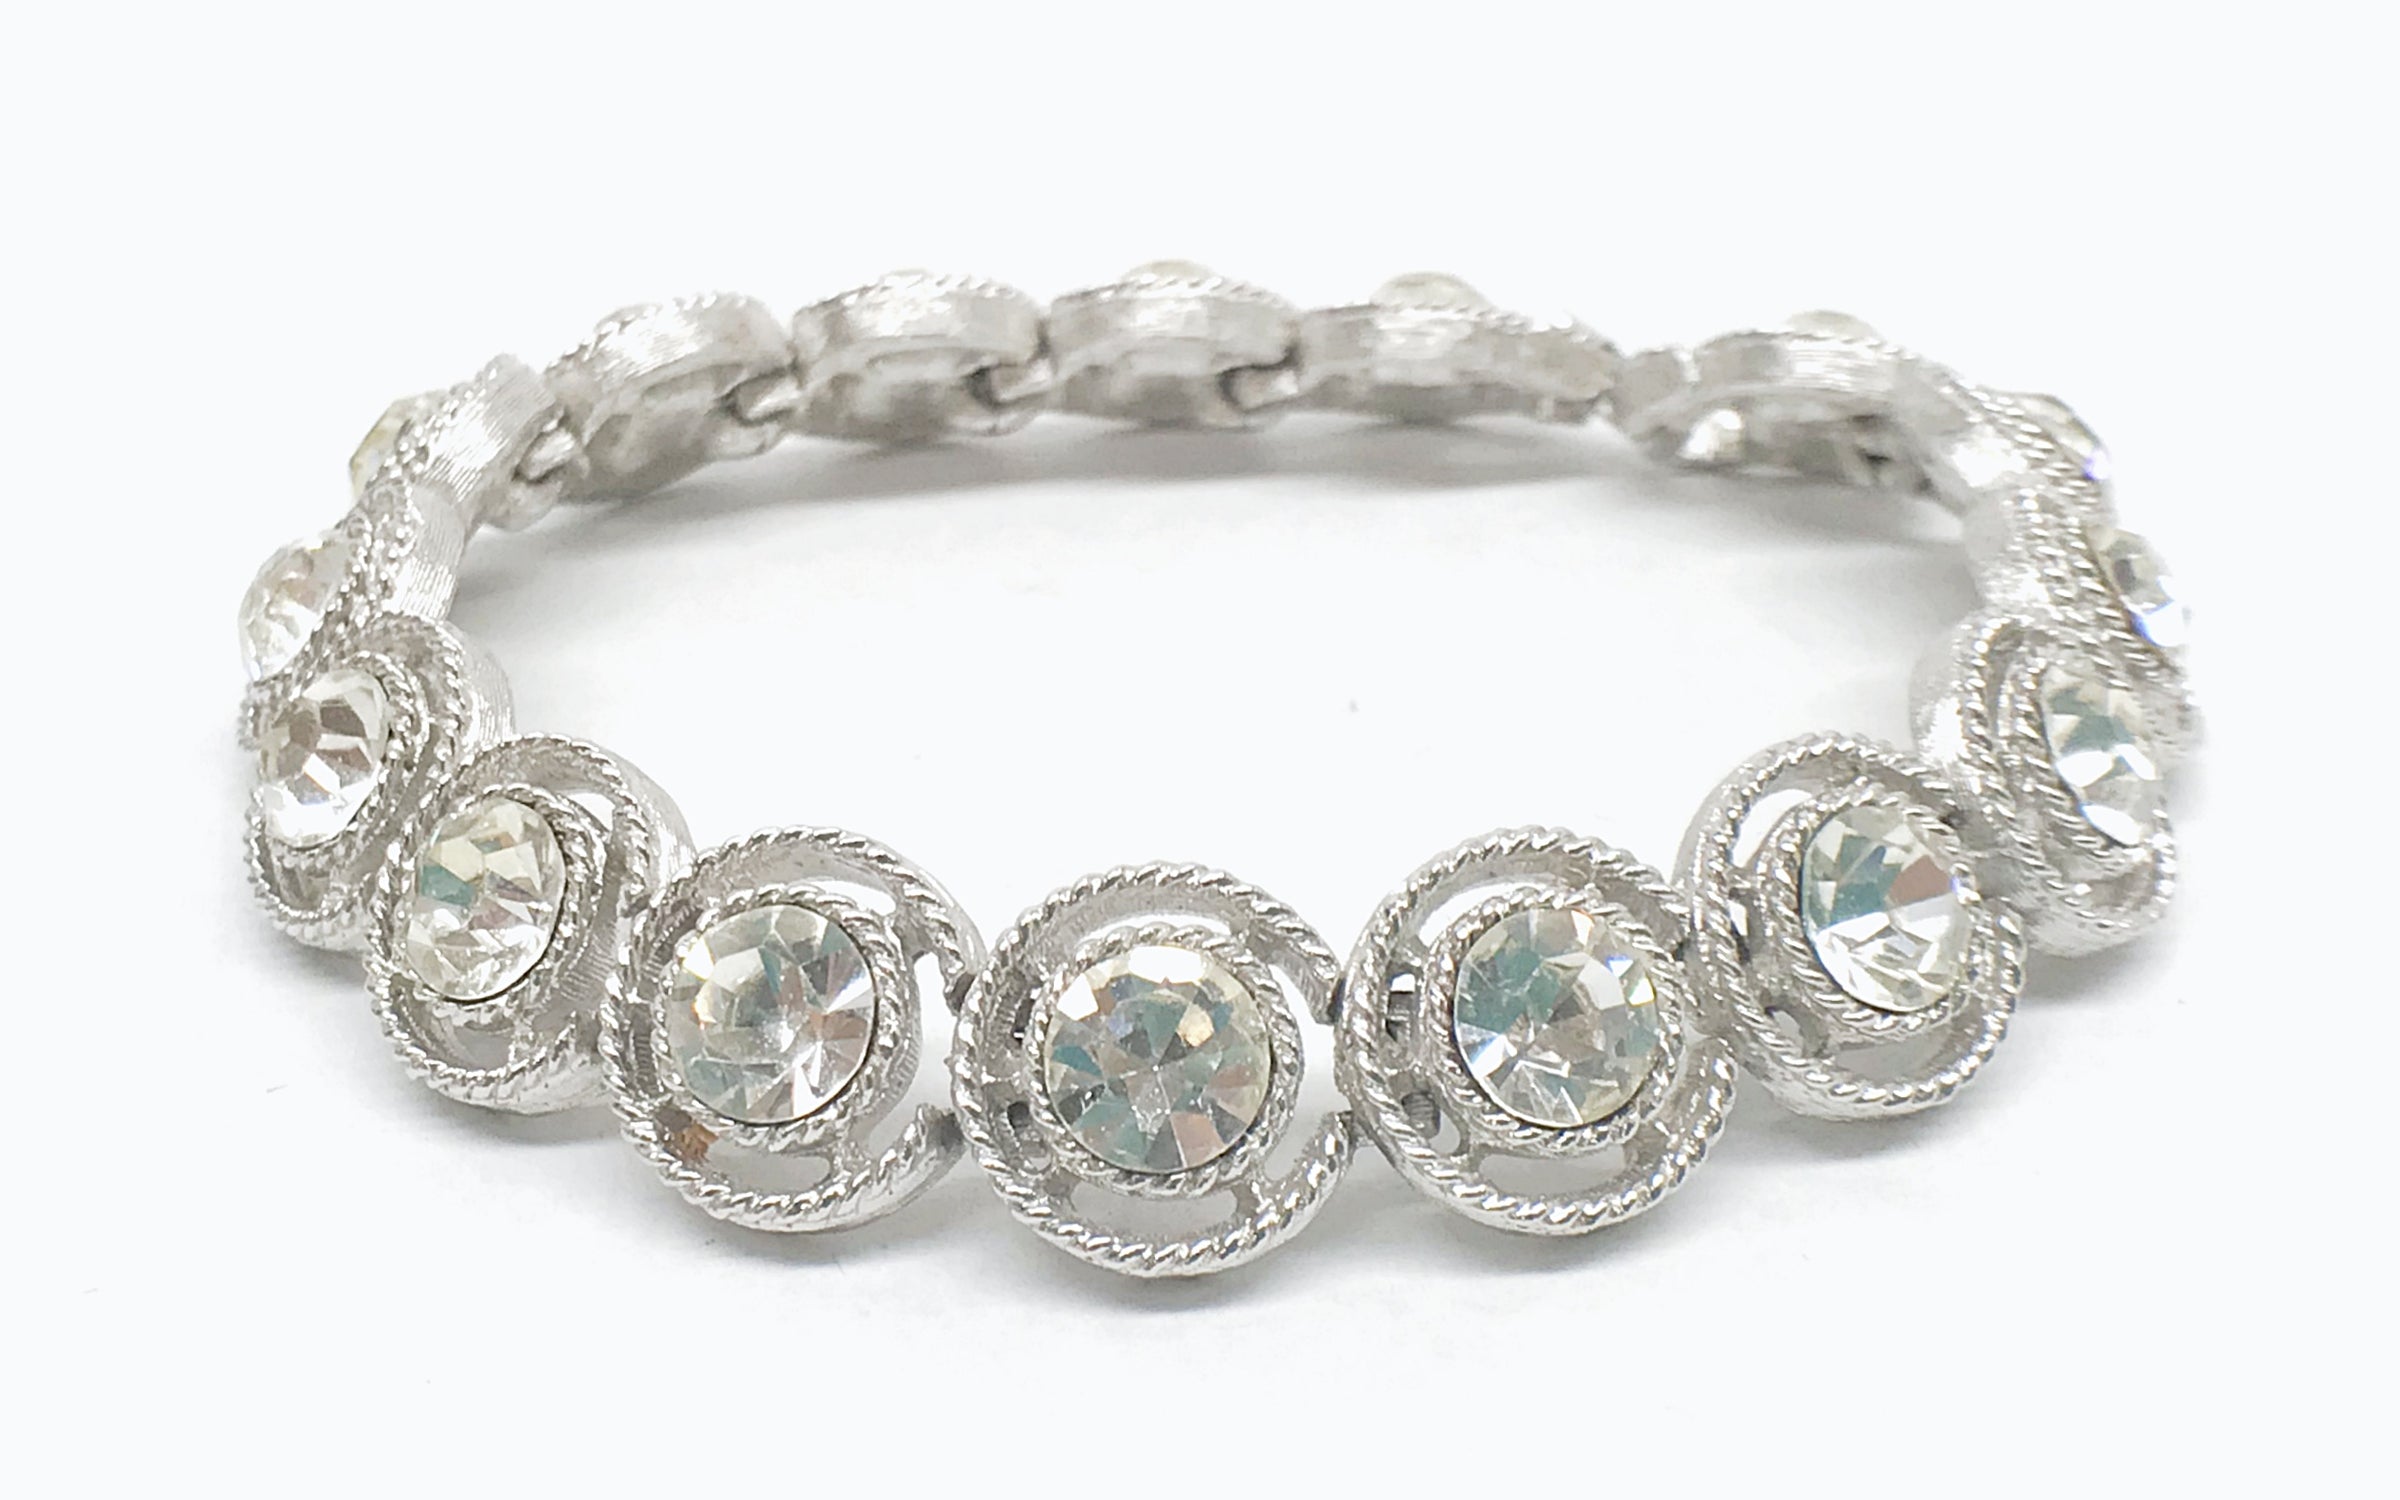 Vintage Crown Trifari Silver Tone and Clear Round Crystal Link Bracelet - Hers and His Treasures